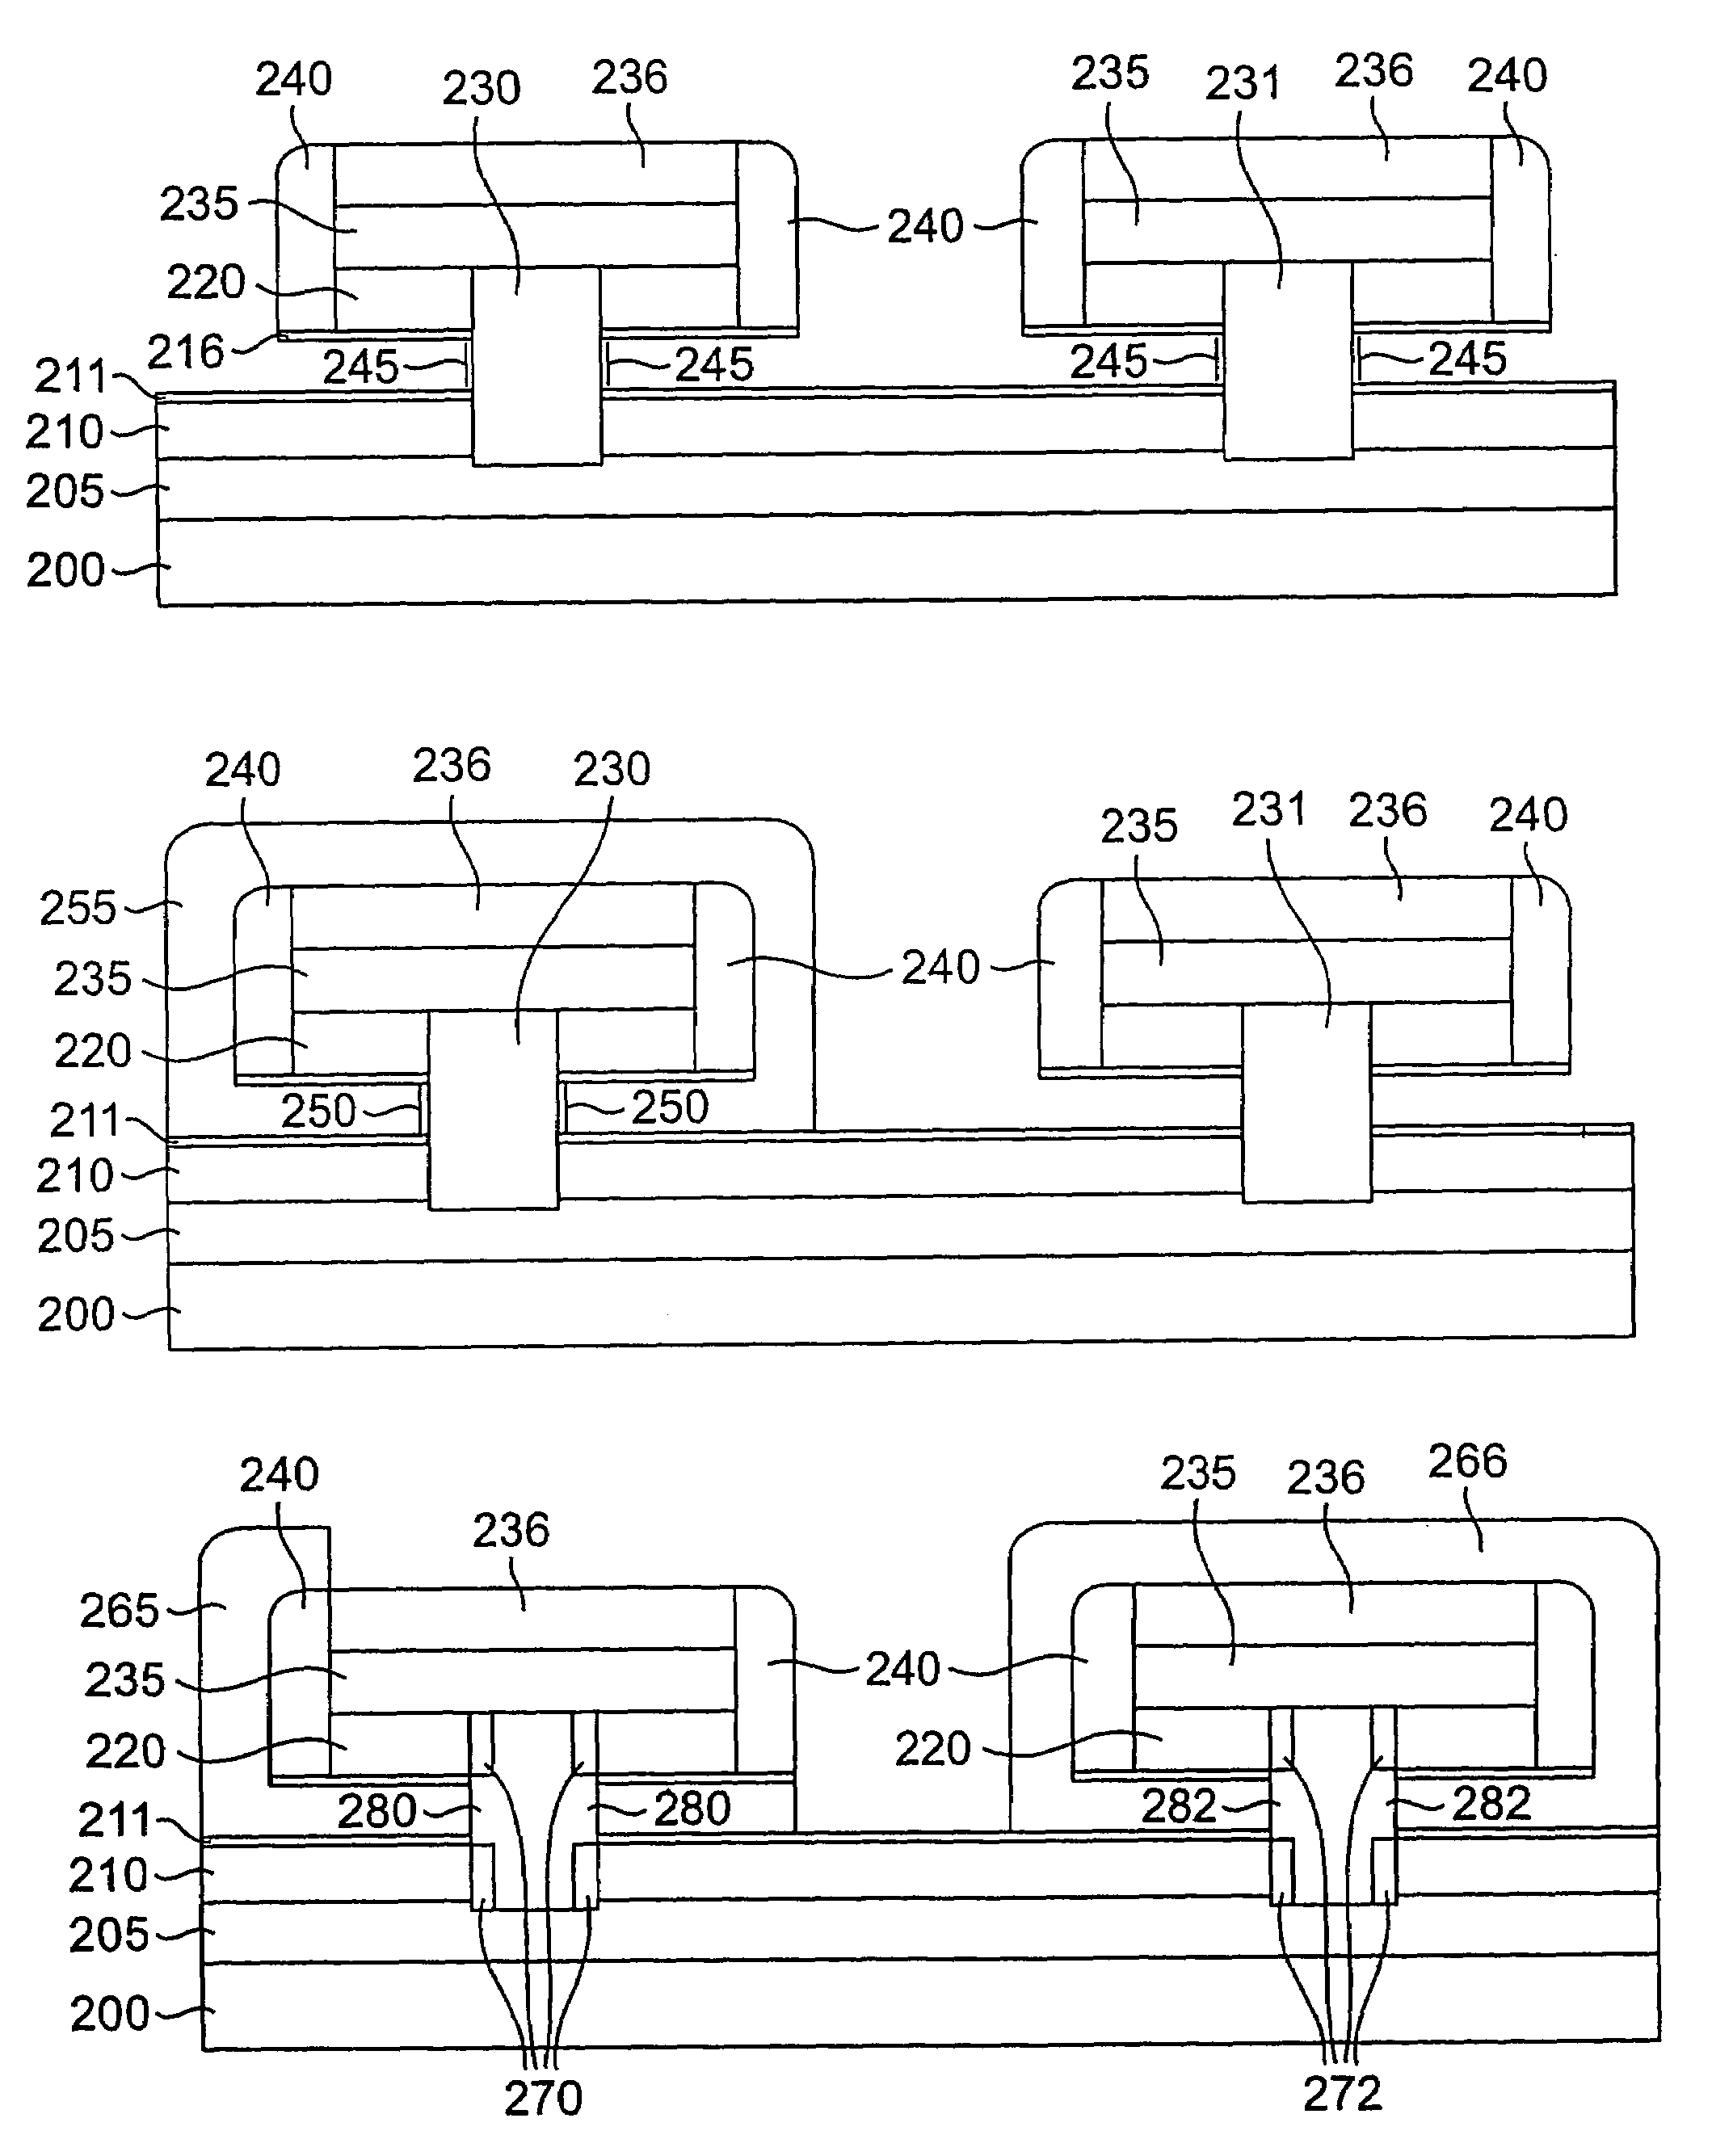 Vertical replacement-gate junction field-effect transistor